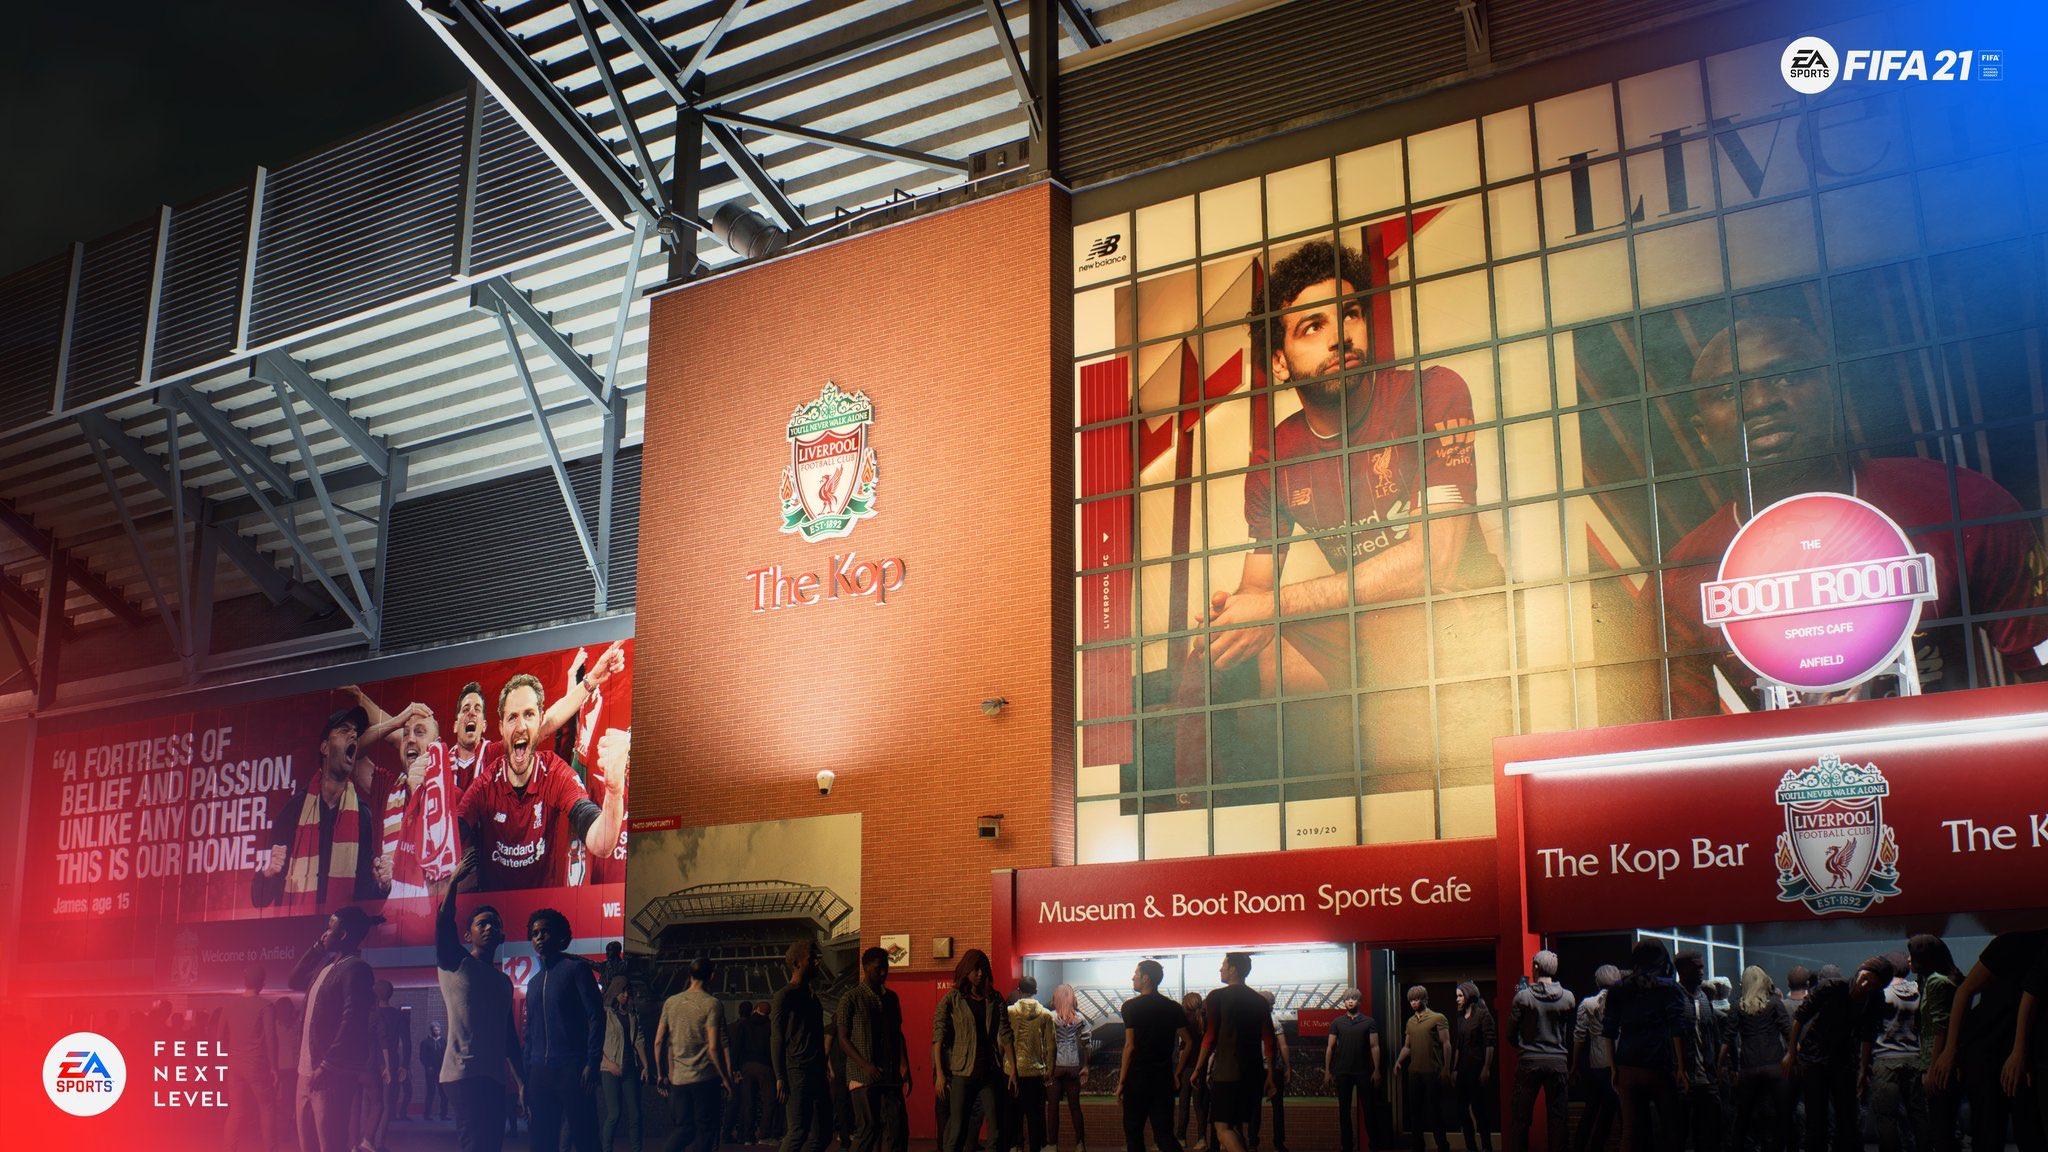 Outside Liverpool's Anfield stadium in FIFA 21